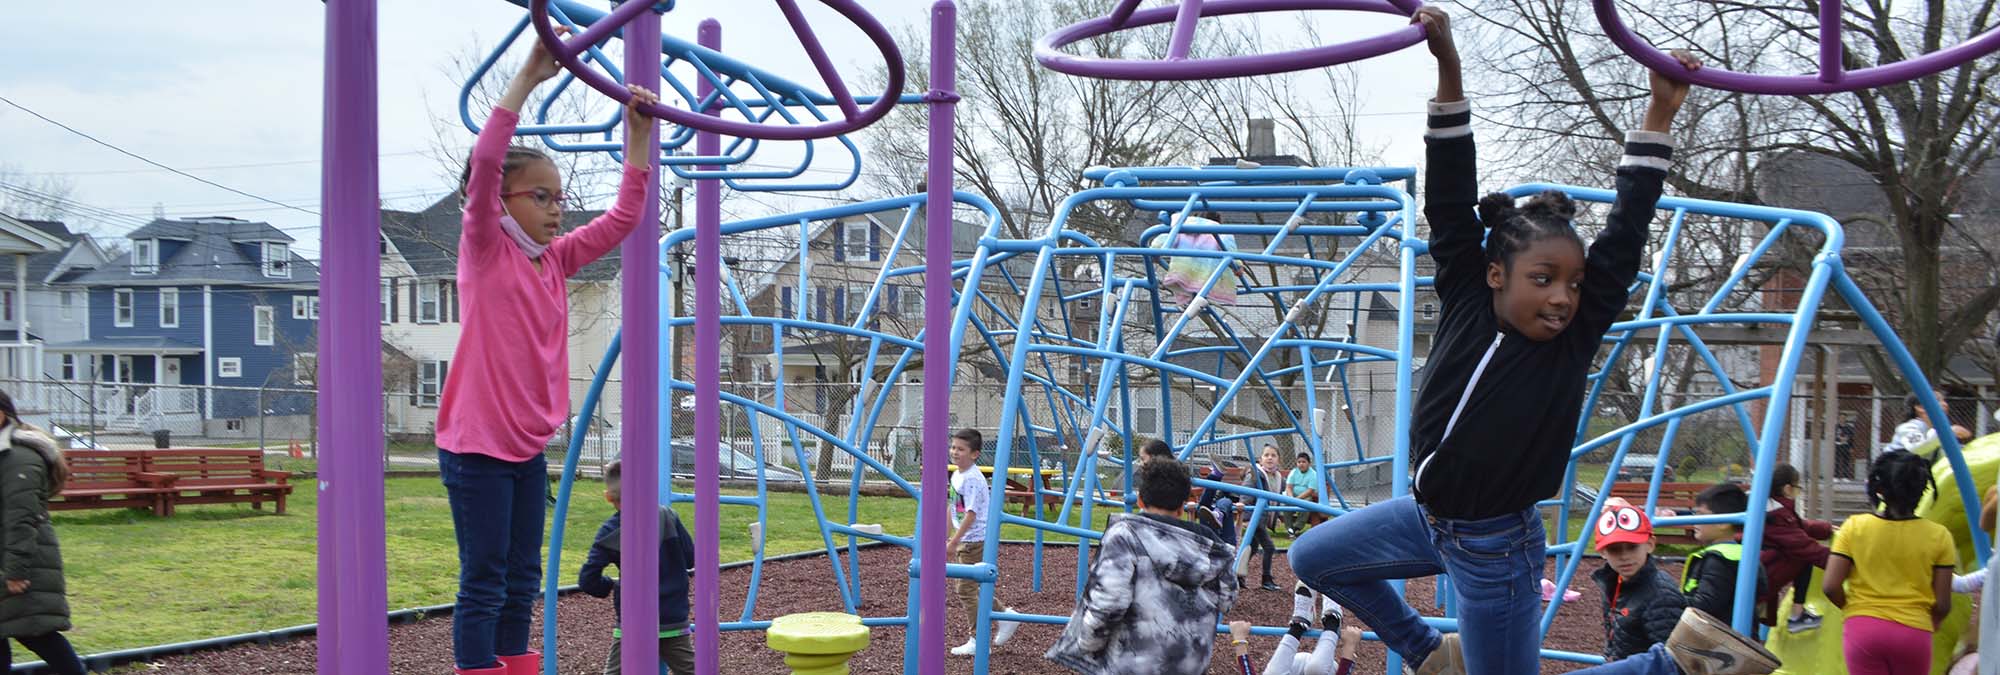 Students use monkey bars on playground at recess